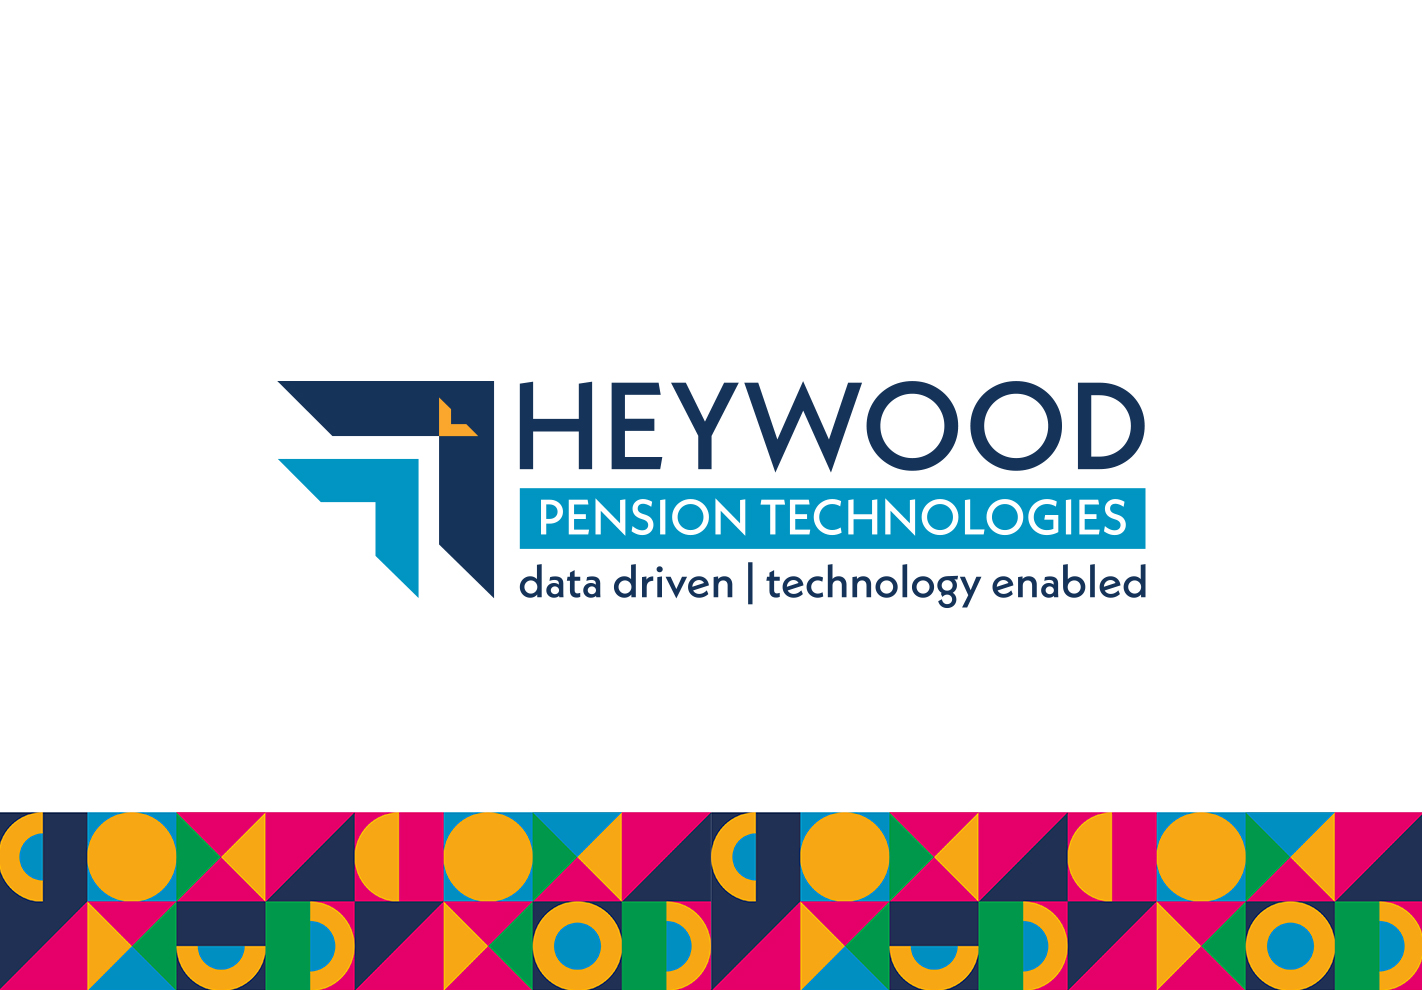 Heywood featured image international group call centre south africa the agency creative design studio